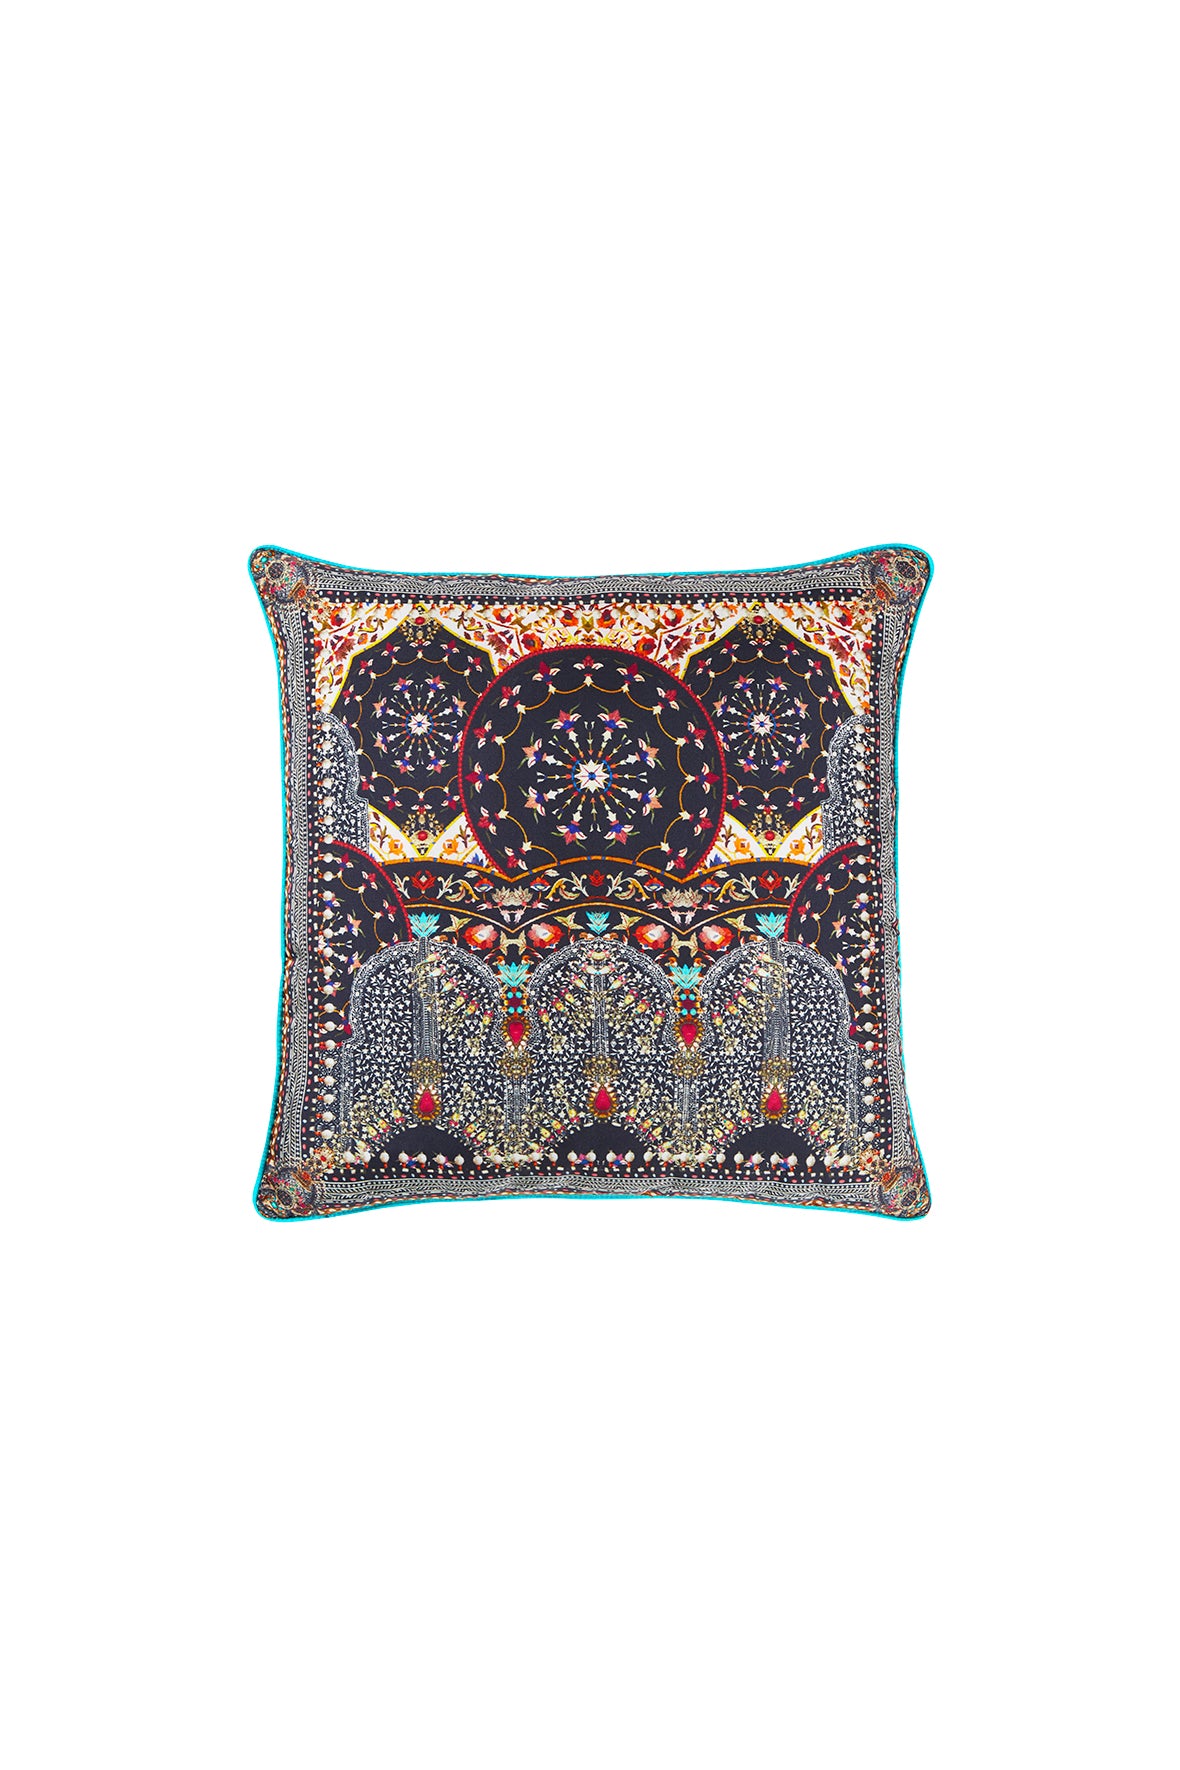 THE SPIRIT WITHIN SMALL SQUARE CUSHION